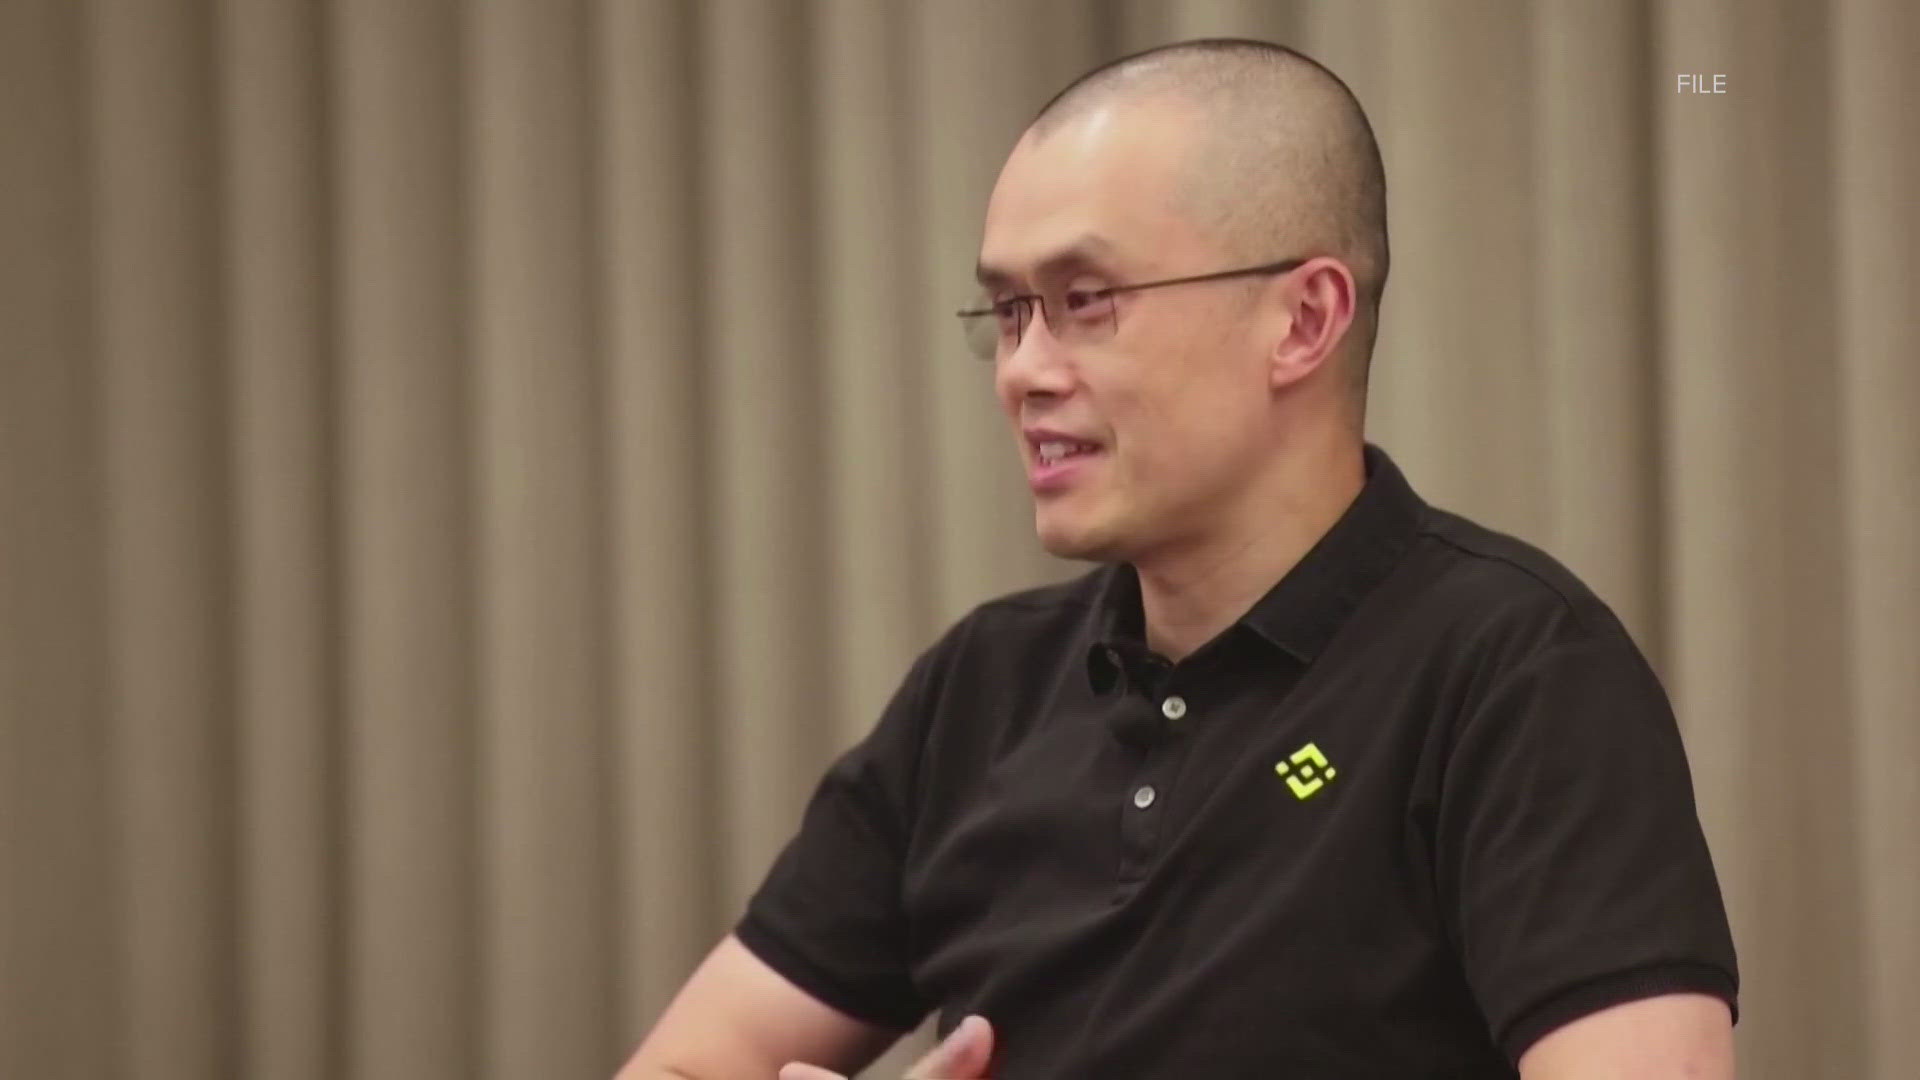 Zhao pleaded guilty and stepped down as Binance CEO in November as the company agreed to pay $4.3 billion to settle money laundering allegations